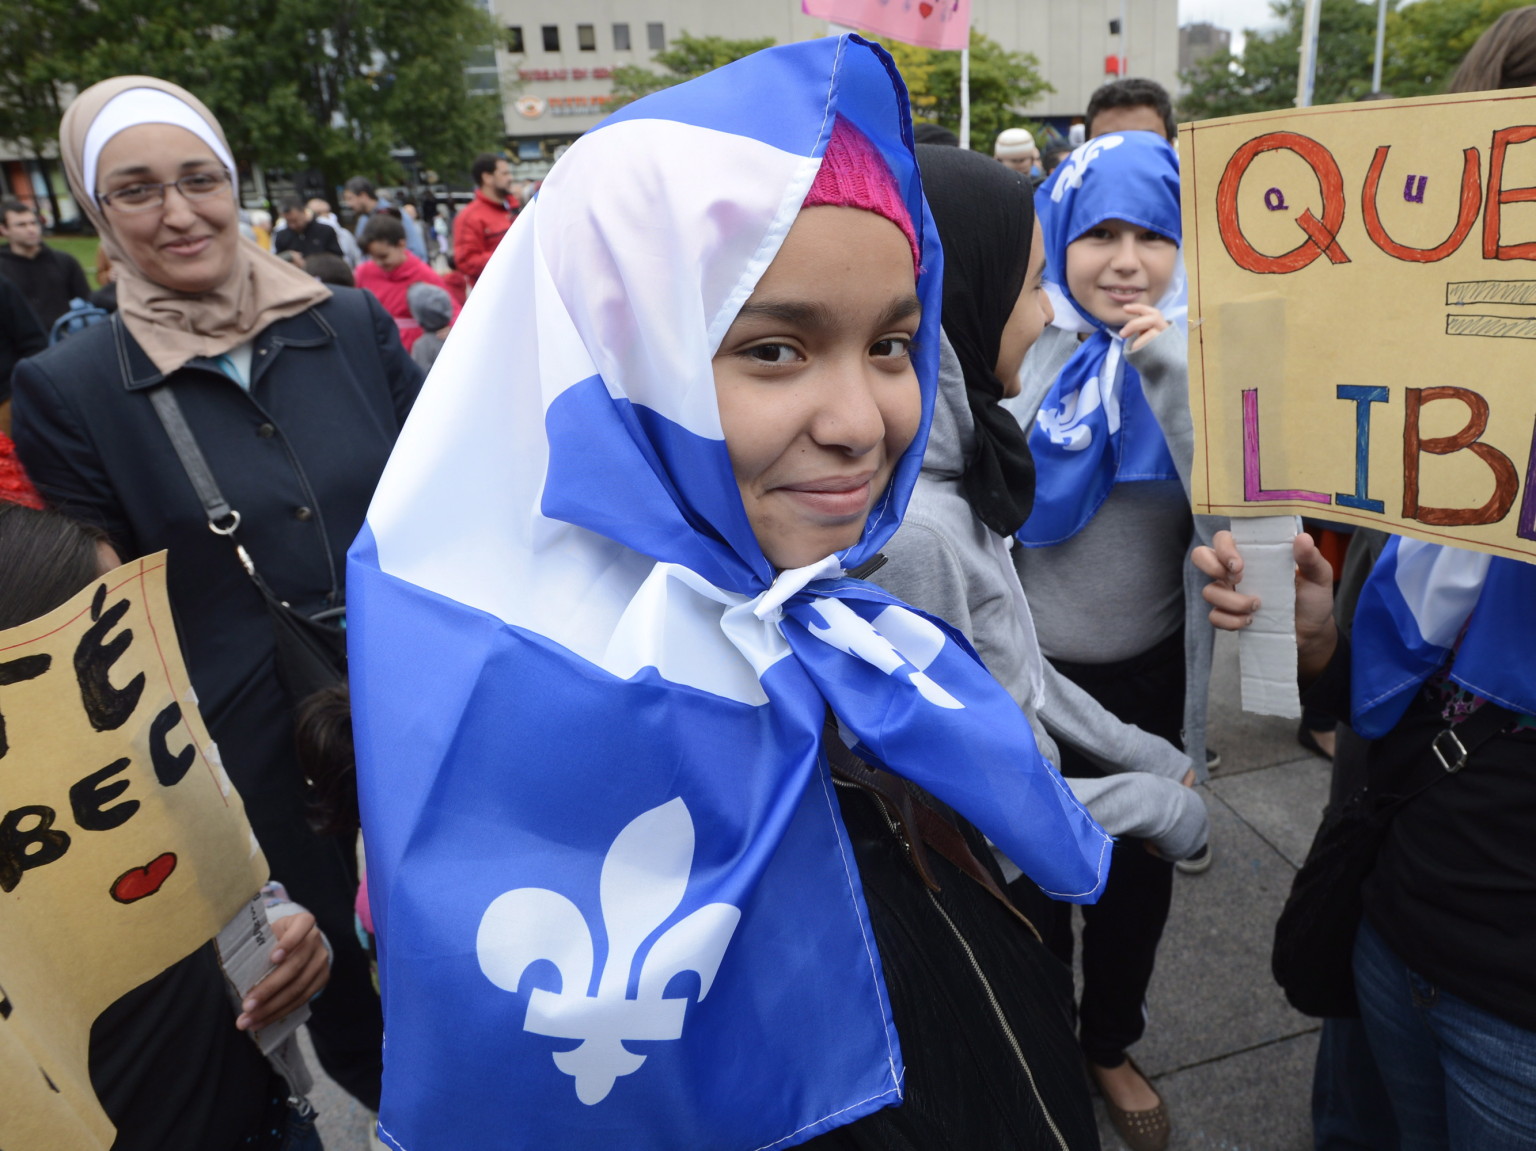 Demonstrators take part in a protest against Quebec's proposed Values Charter in Montreal on Saturday Sept. 14, 2013. THE CANADIAN PRESS/Ryan Remiorz